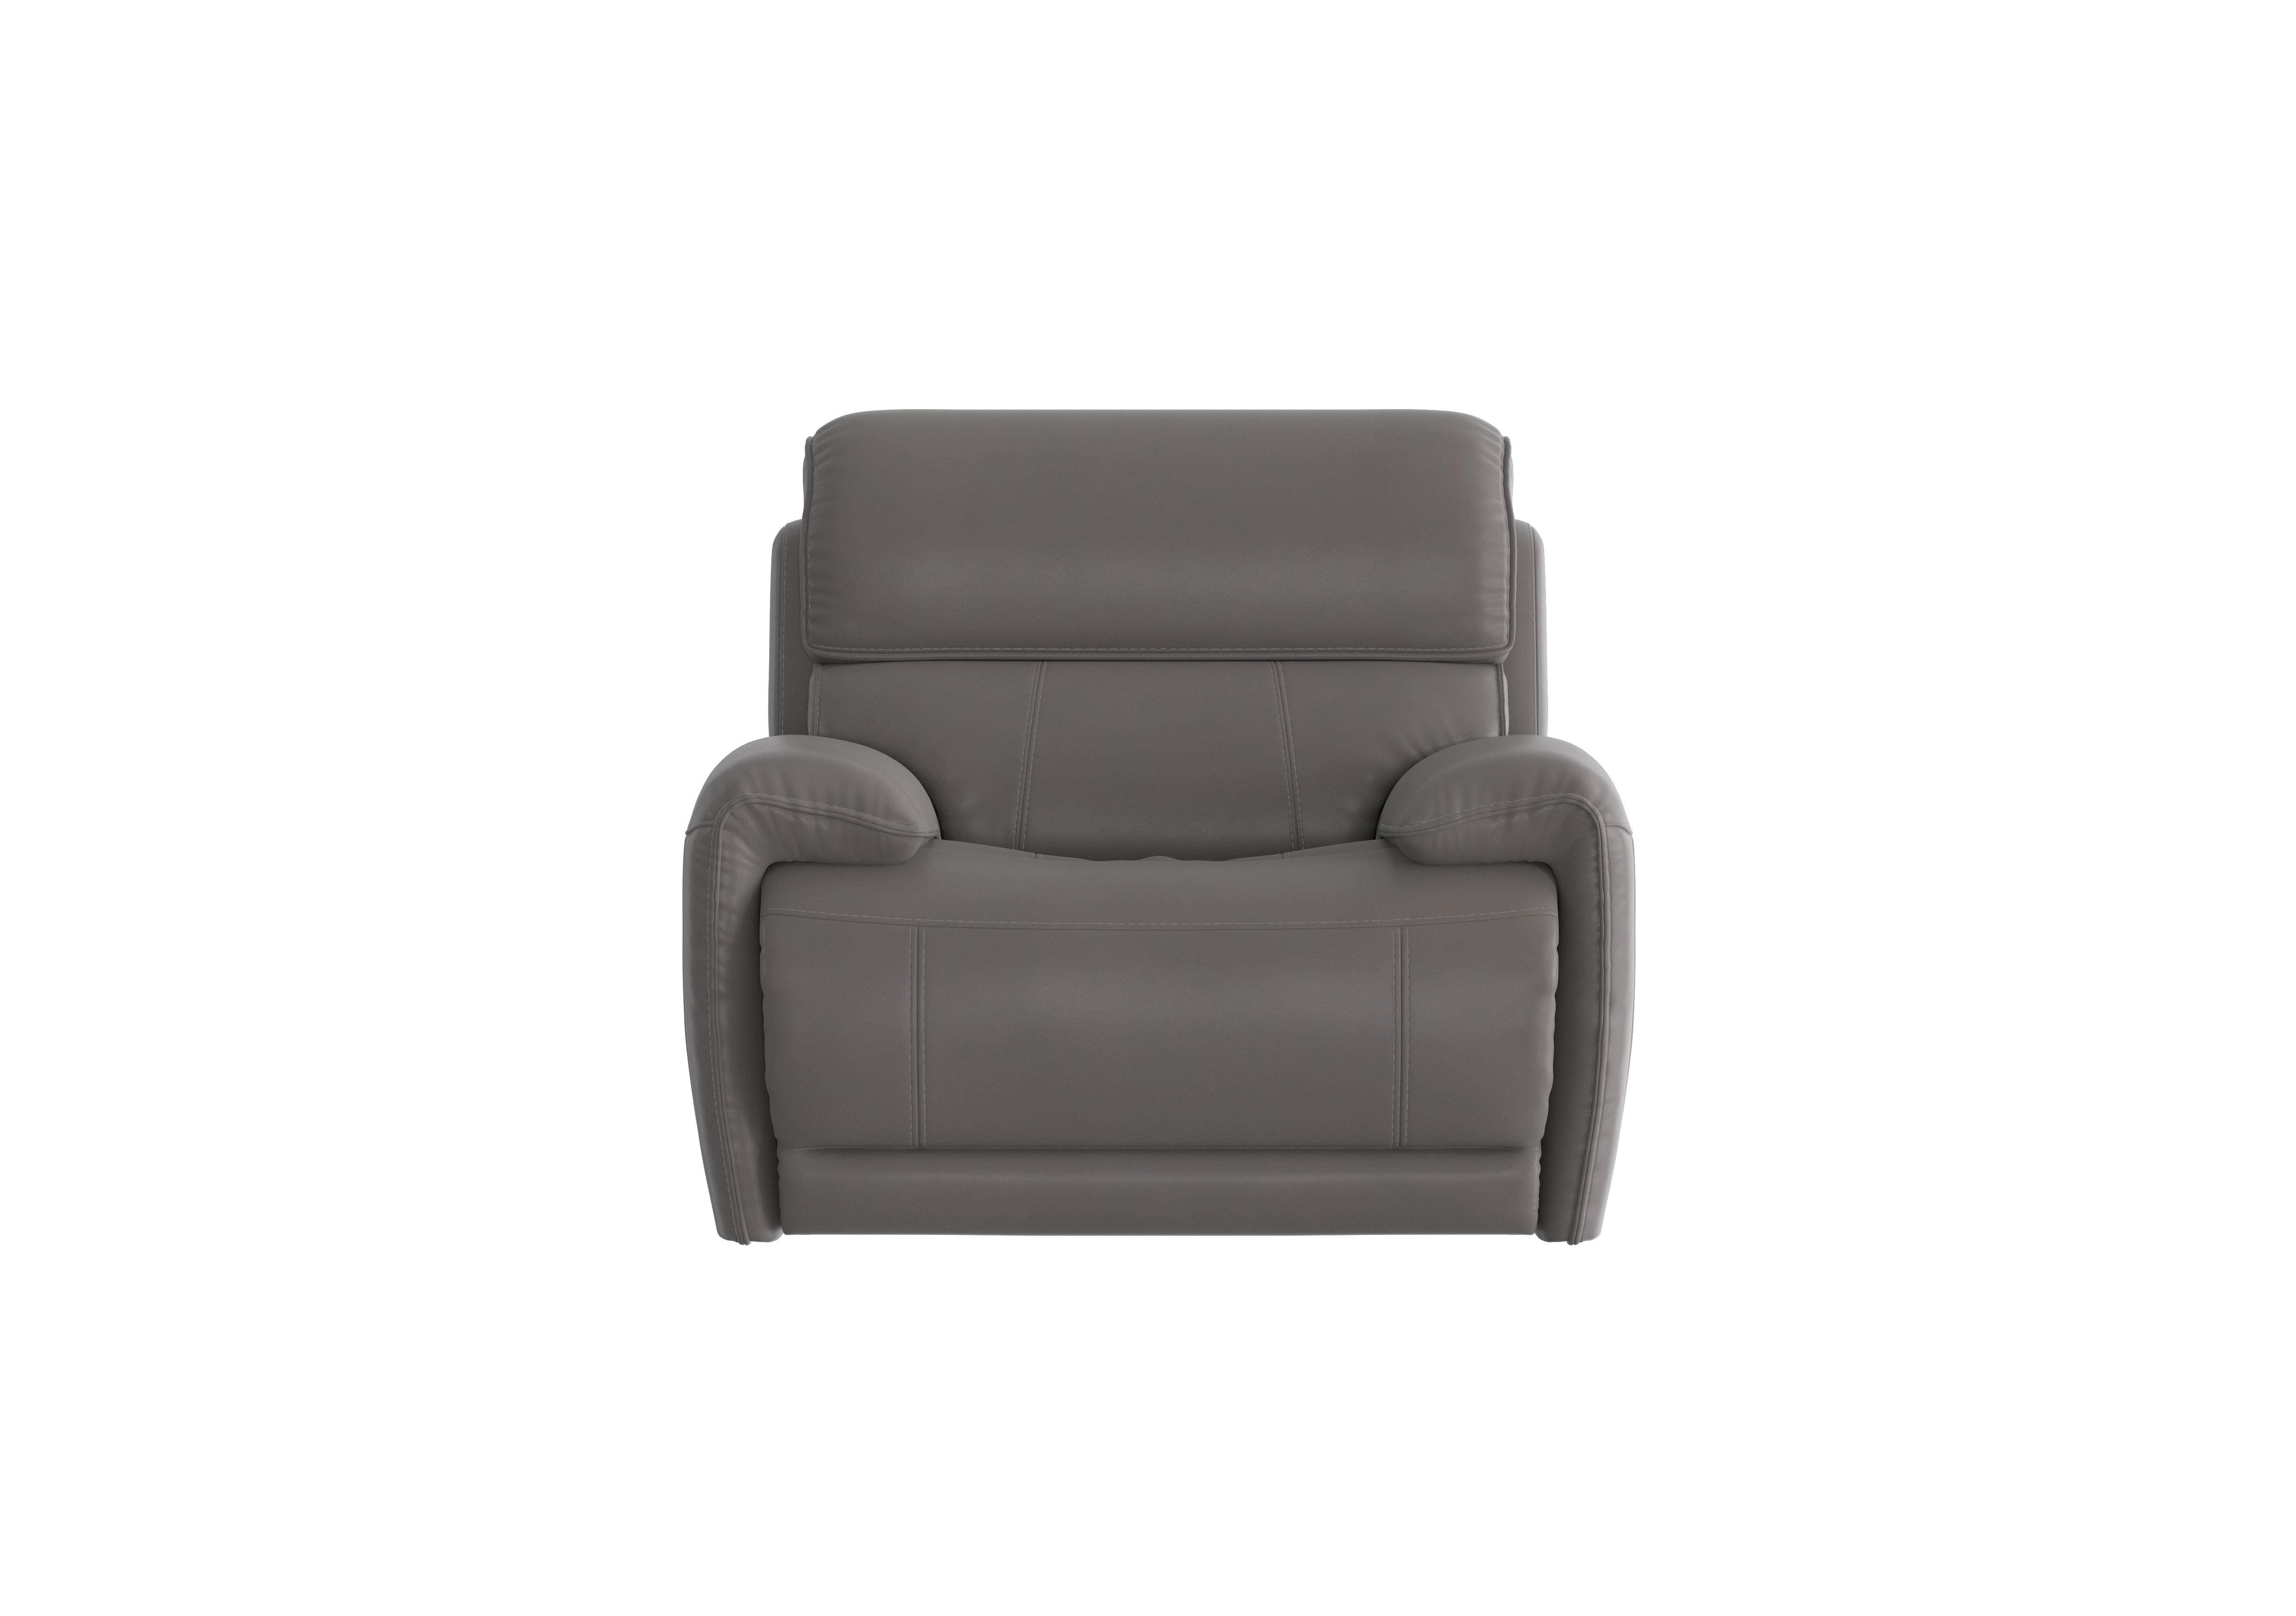 Link Leather Armchair in Bv-042e Elephant on Furniture Village